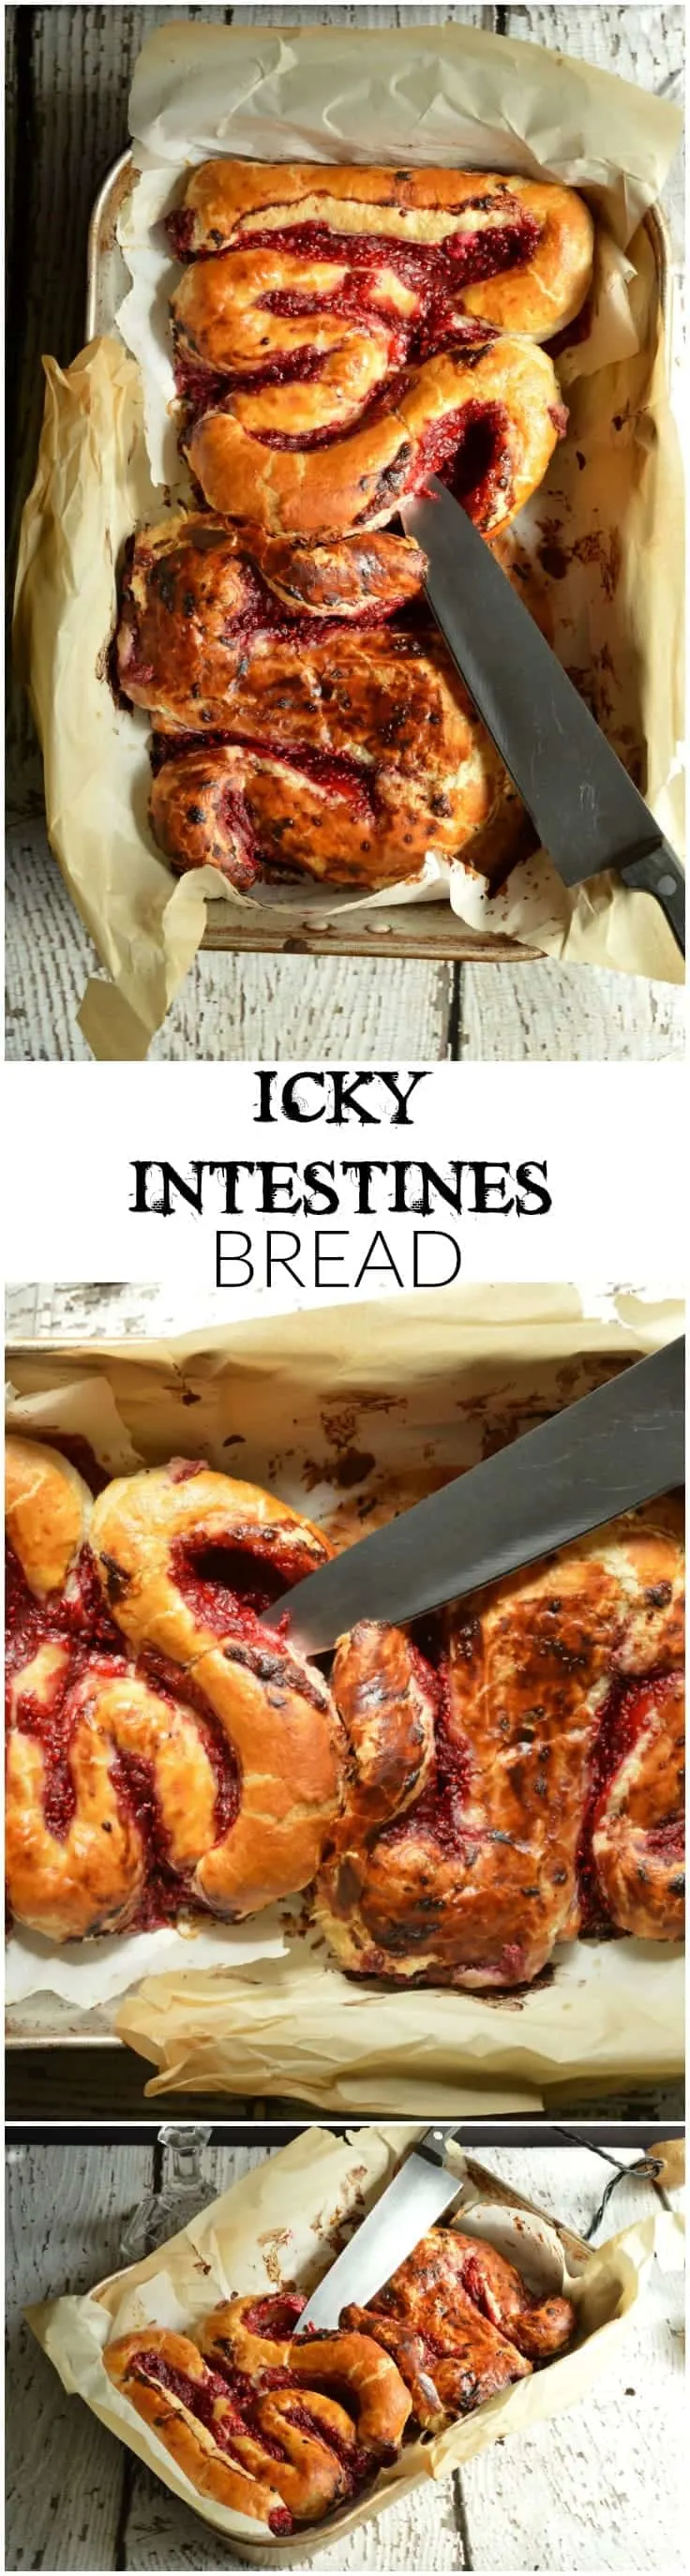 Icky Intestines bread will make your Halloween Boo Bash guests both gasp and swoon! Puff pastry is filled with sweet cream cheese and raspberry sauce, rolled up into large and small intestine shapes, and baked for a sweet breakfast or dessert icky good Halloween treat